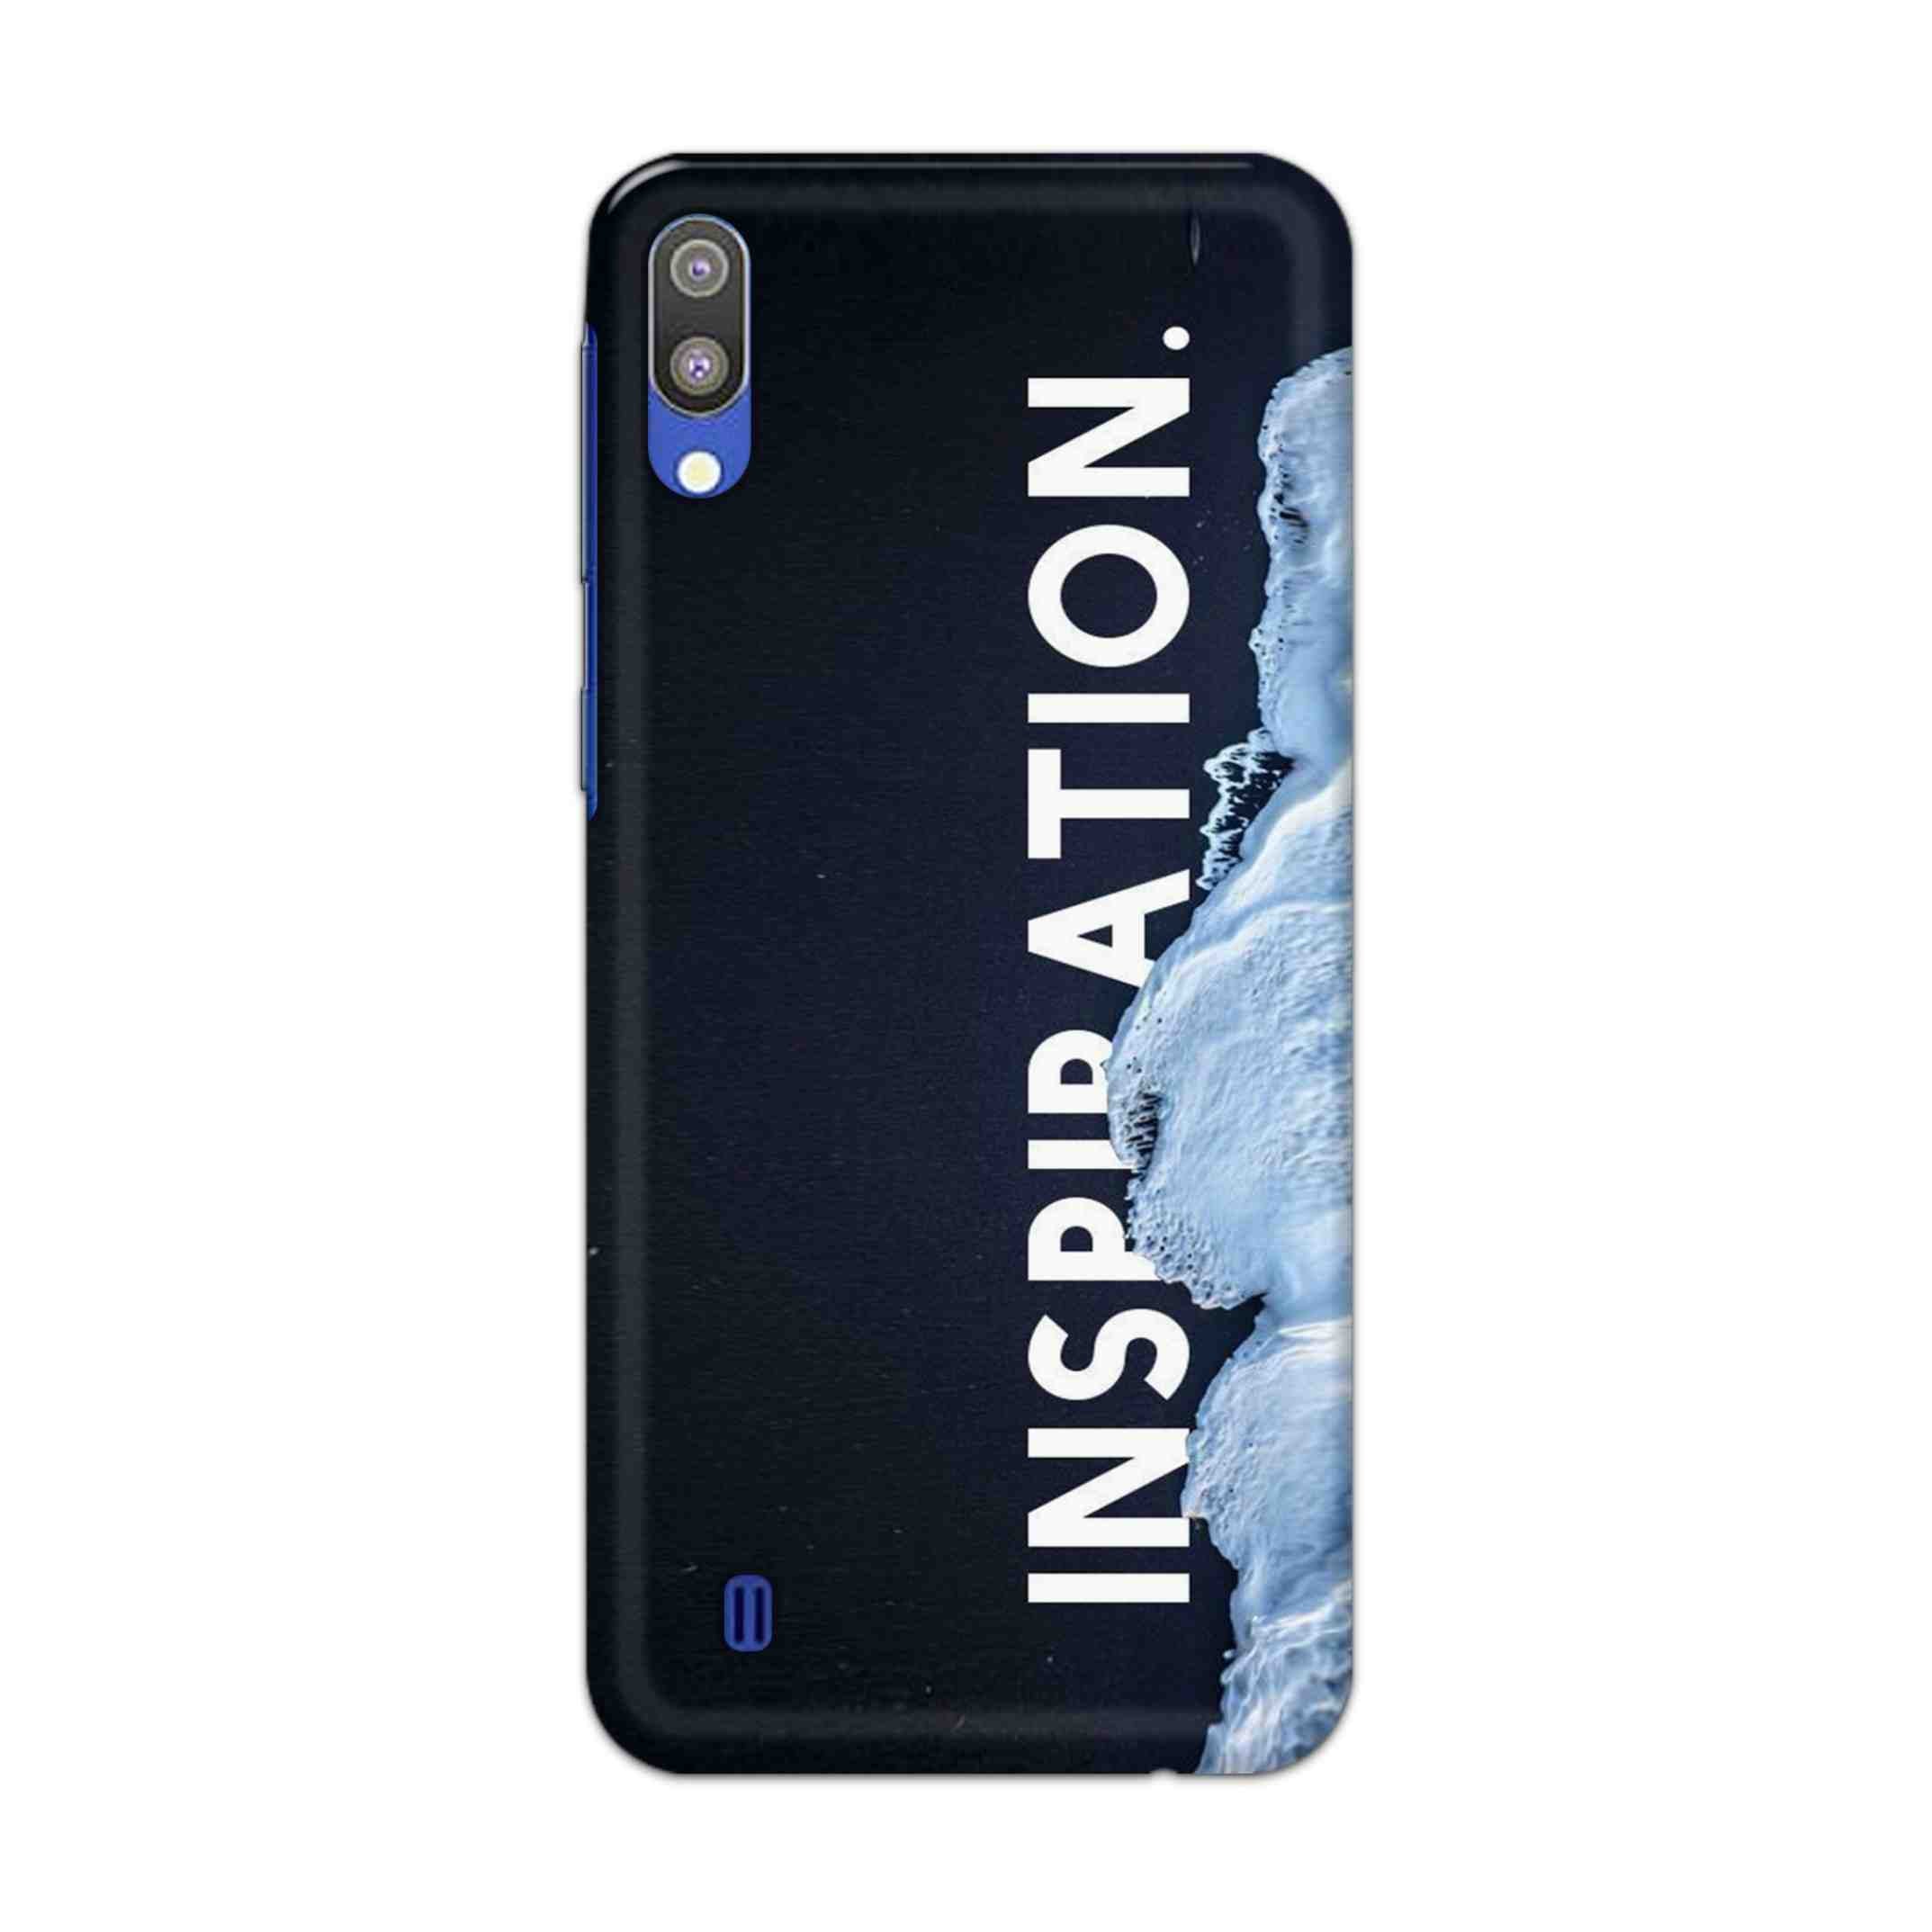 Buy Inspiration Hard Back Mobile Phone Case Cover For Samsung Galaxy M10 Online